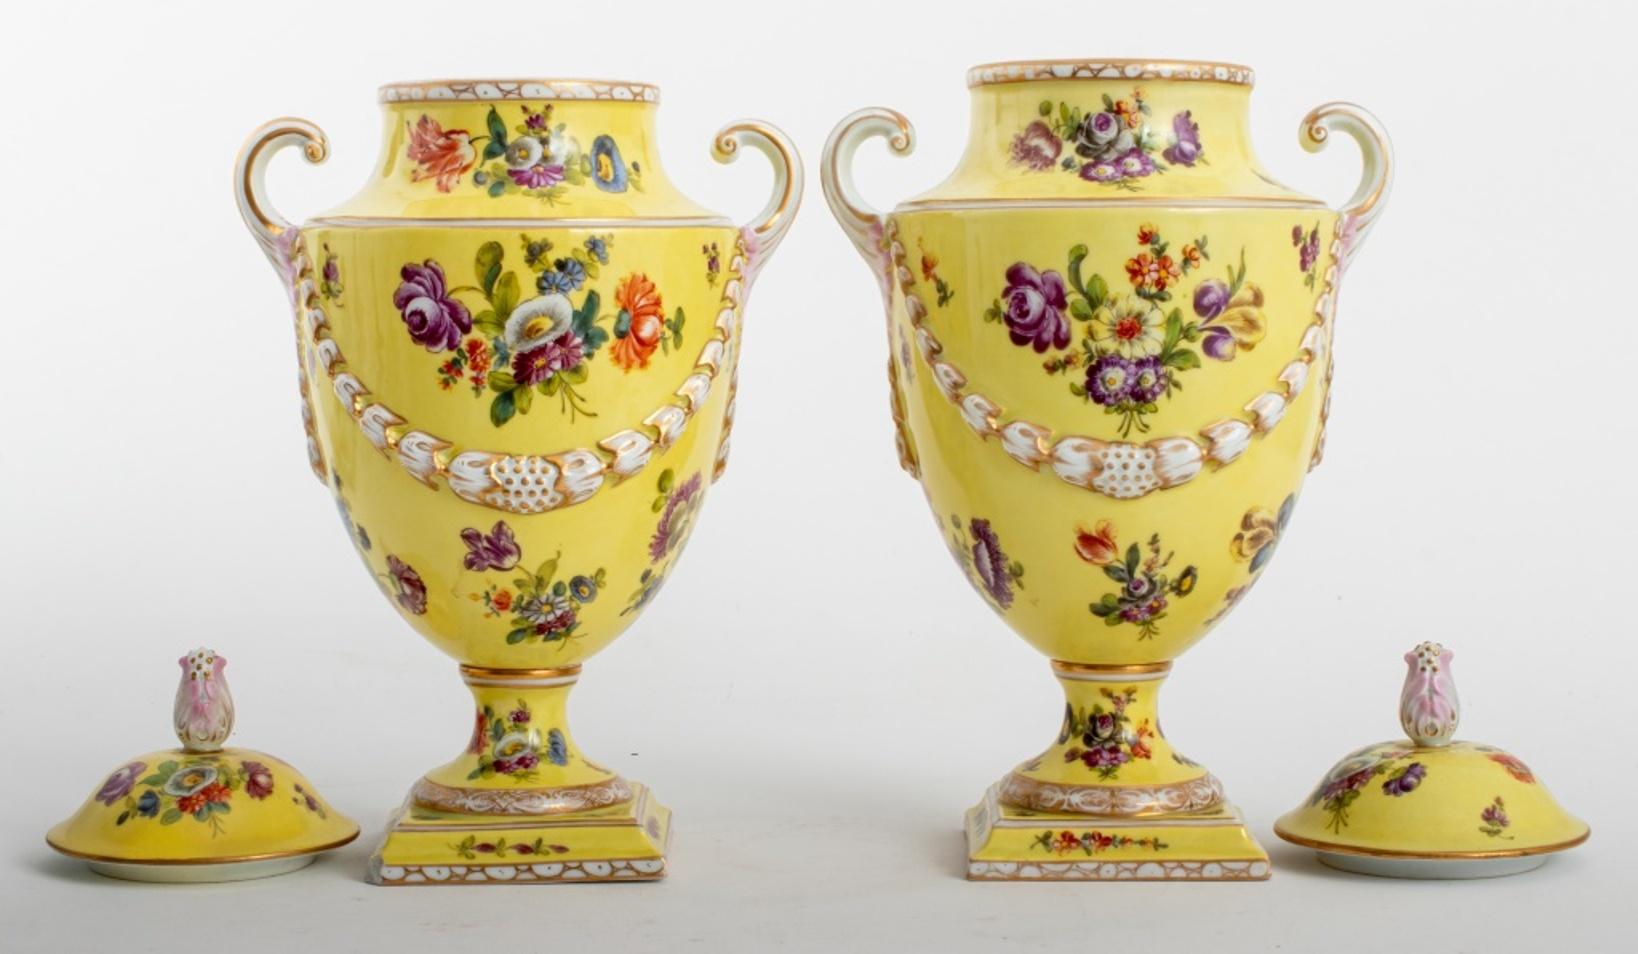 Pair of Dresden German porcelain urn vases with lids, the ceramic vessels hand-painted with polychrome floral designs on yellow grounds with gilt accents, each with blue underglaze mark to underside. One with small chip to base.

Dimensions: 14.5